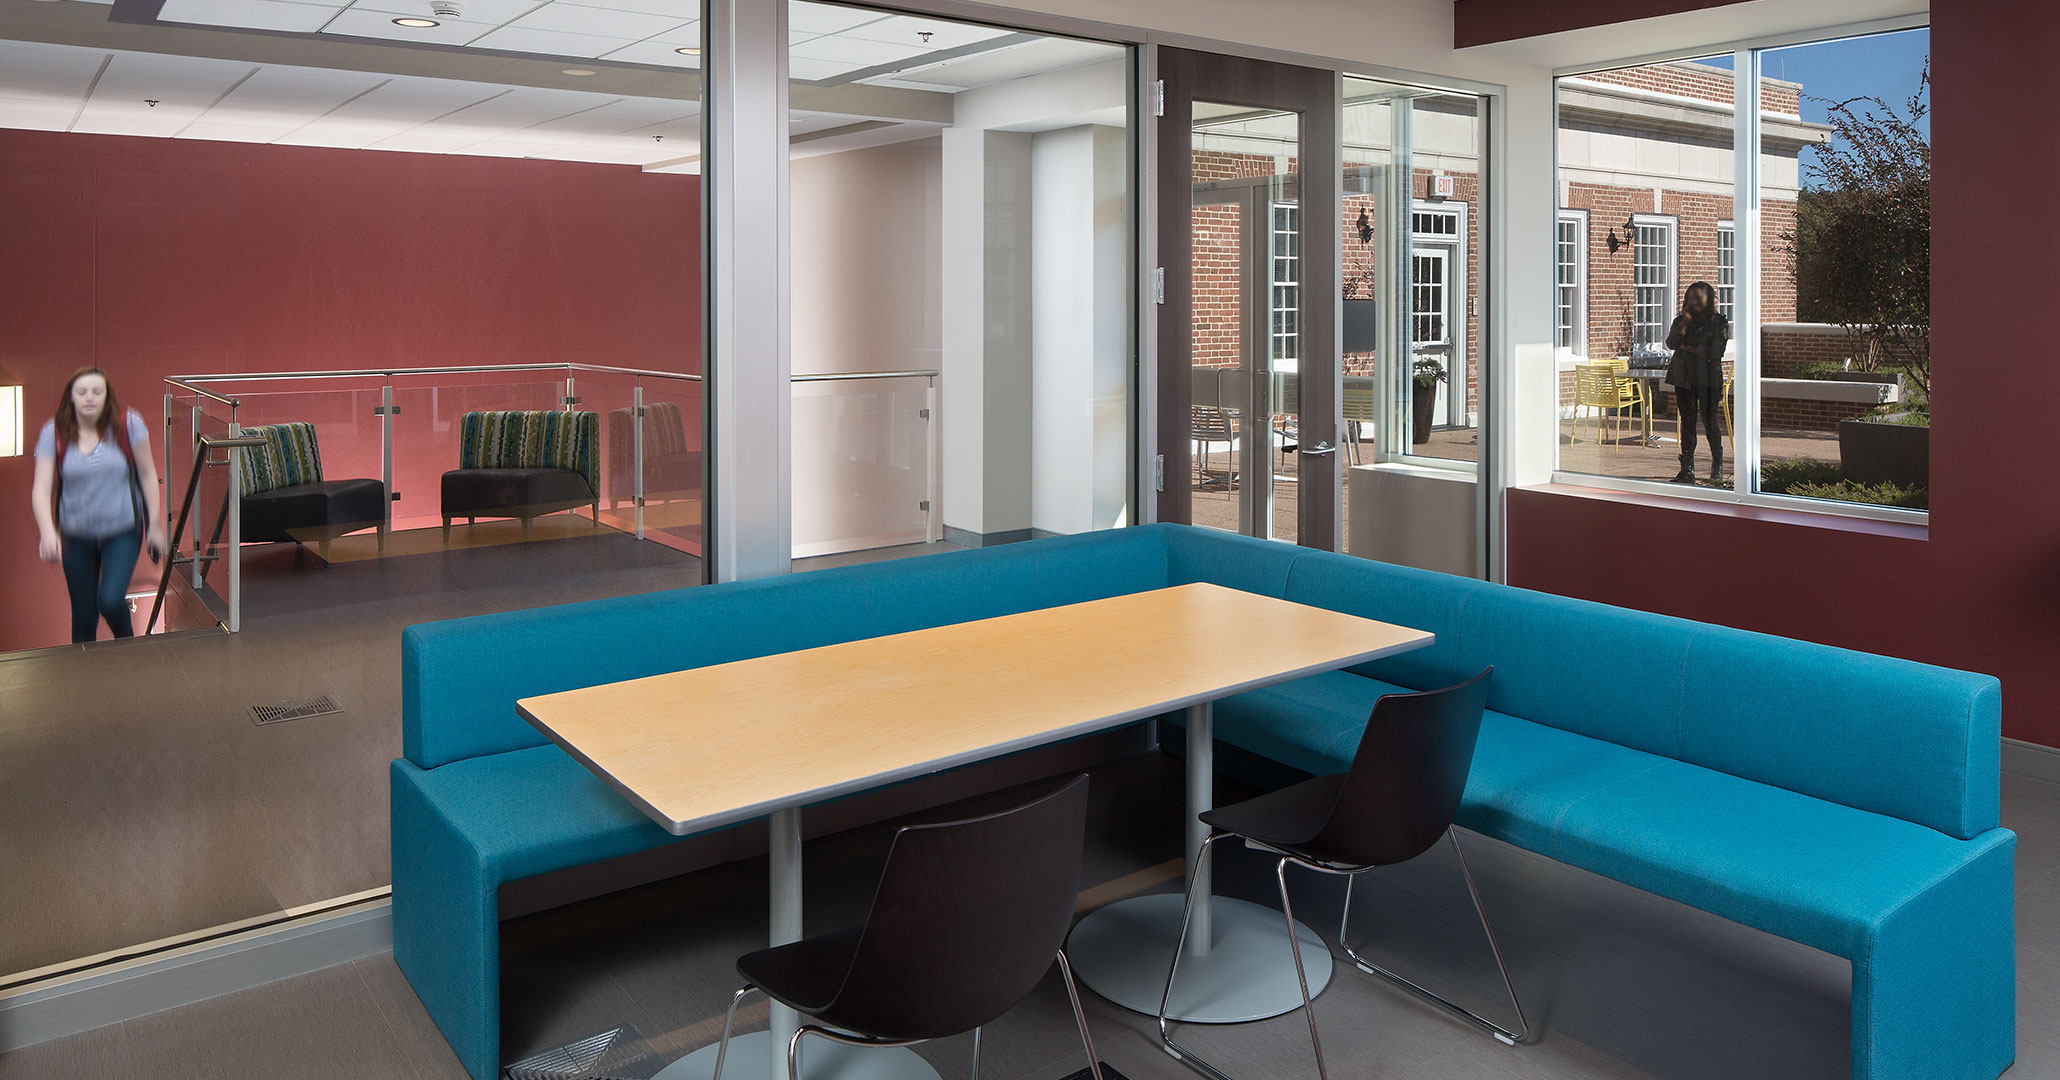 UofSC worked with Boudreaux architects in Columbia, SC to design flexible student spaces.